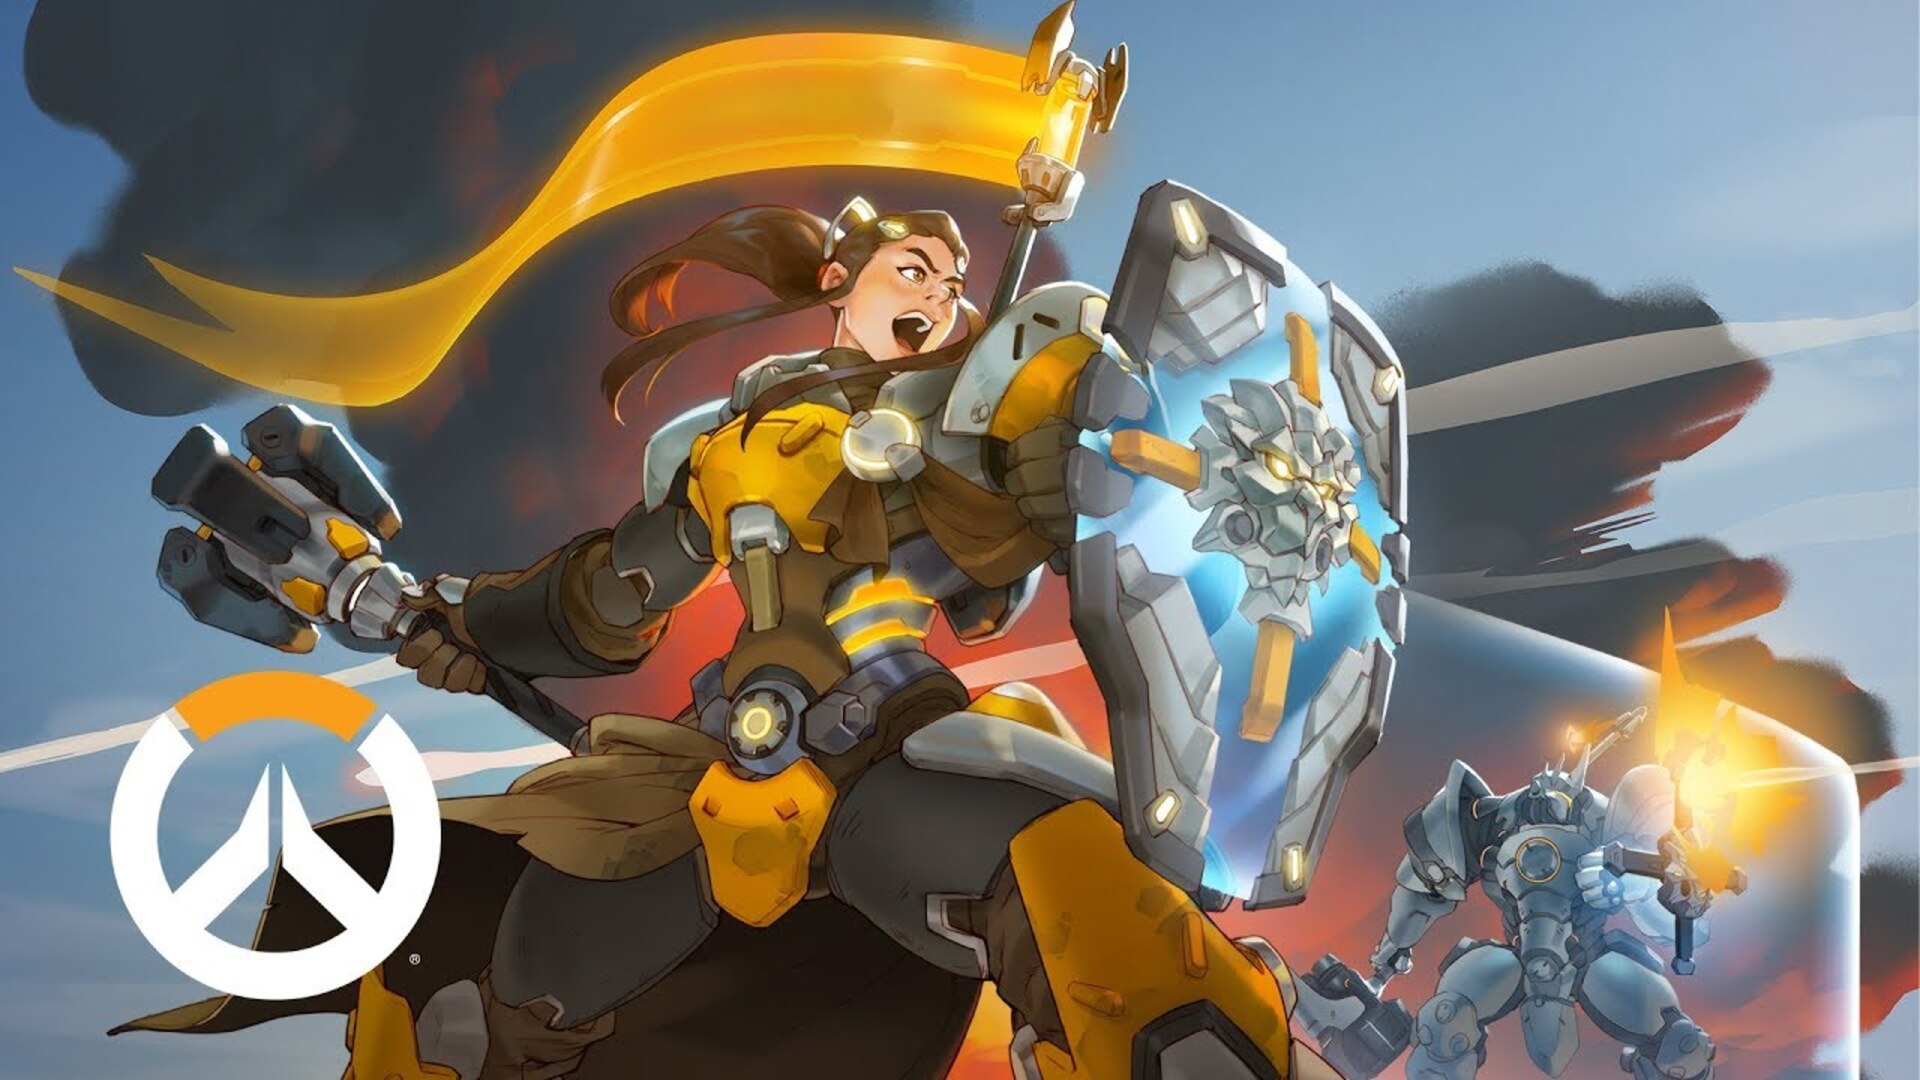 Brigitte keyart showing her holding her shield up, in the midst of battle